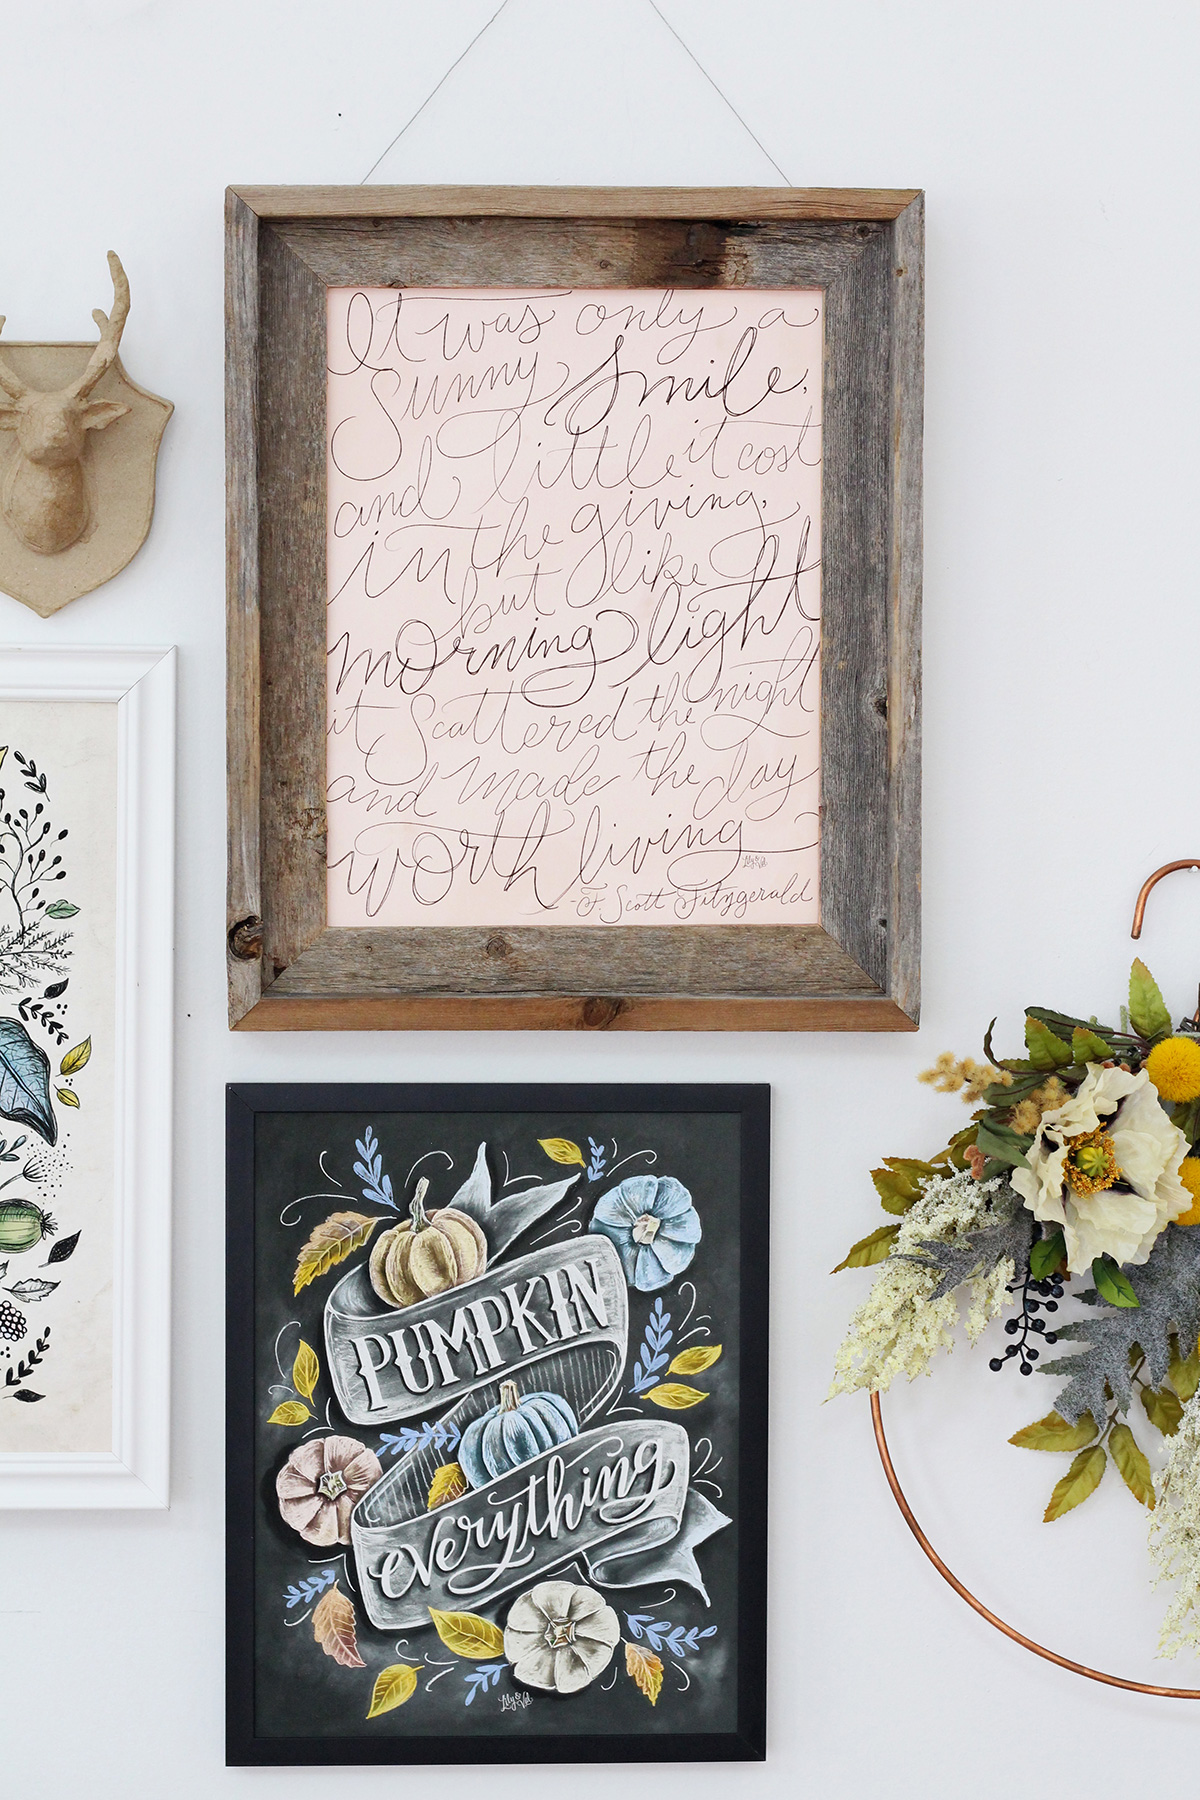 Gallery wall inspiration for elegant, non-traditional fall decor